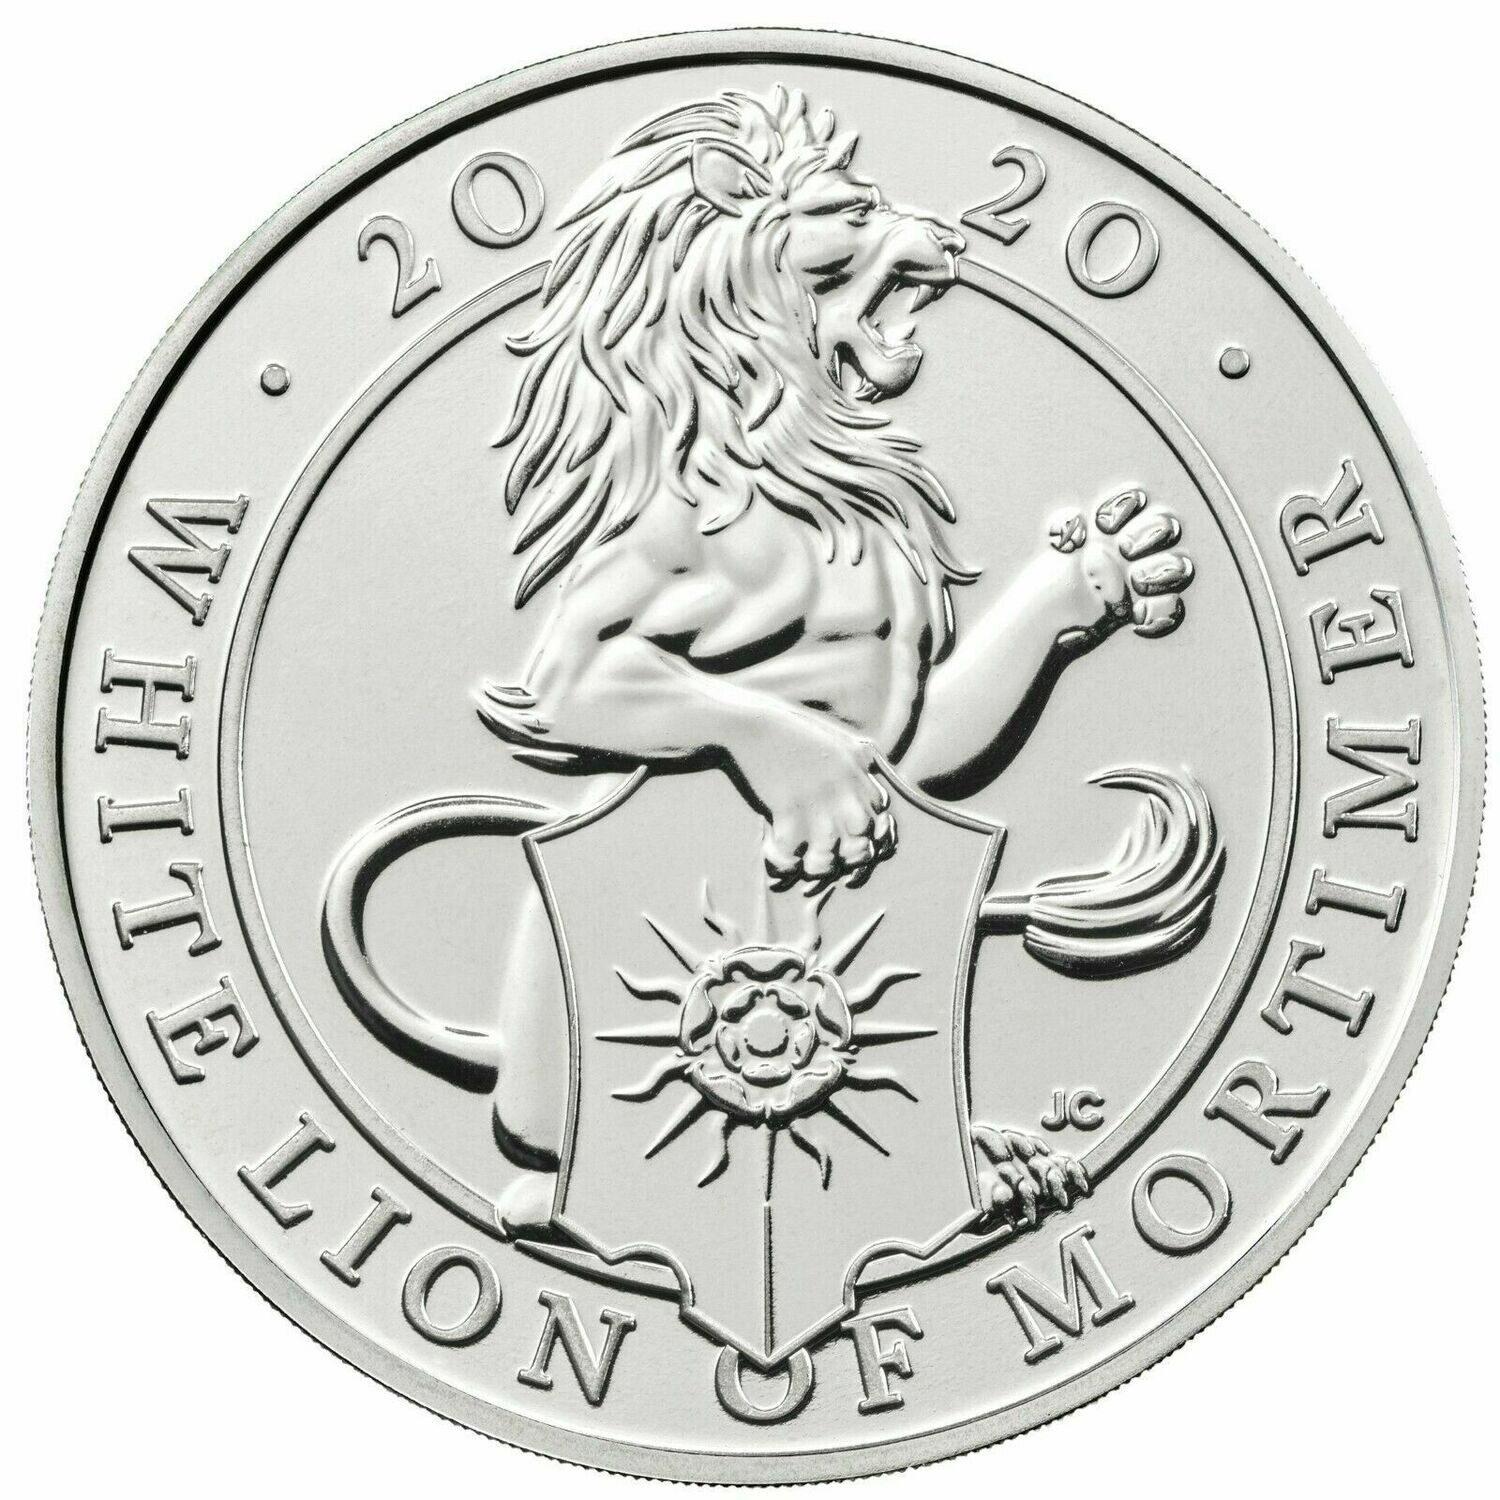 2020 Queens Beasts White Lion of Mortimer £5 Brilliant Uncirculated Coin